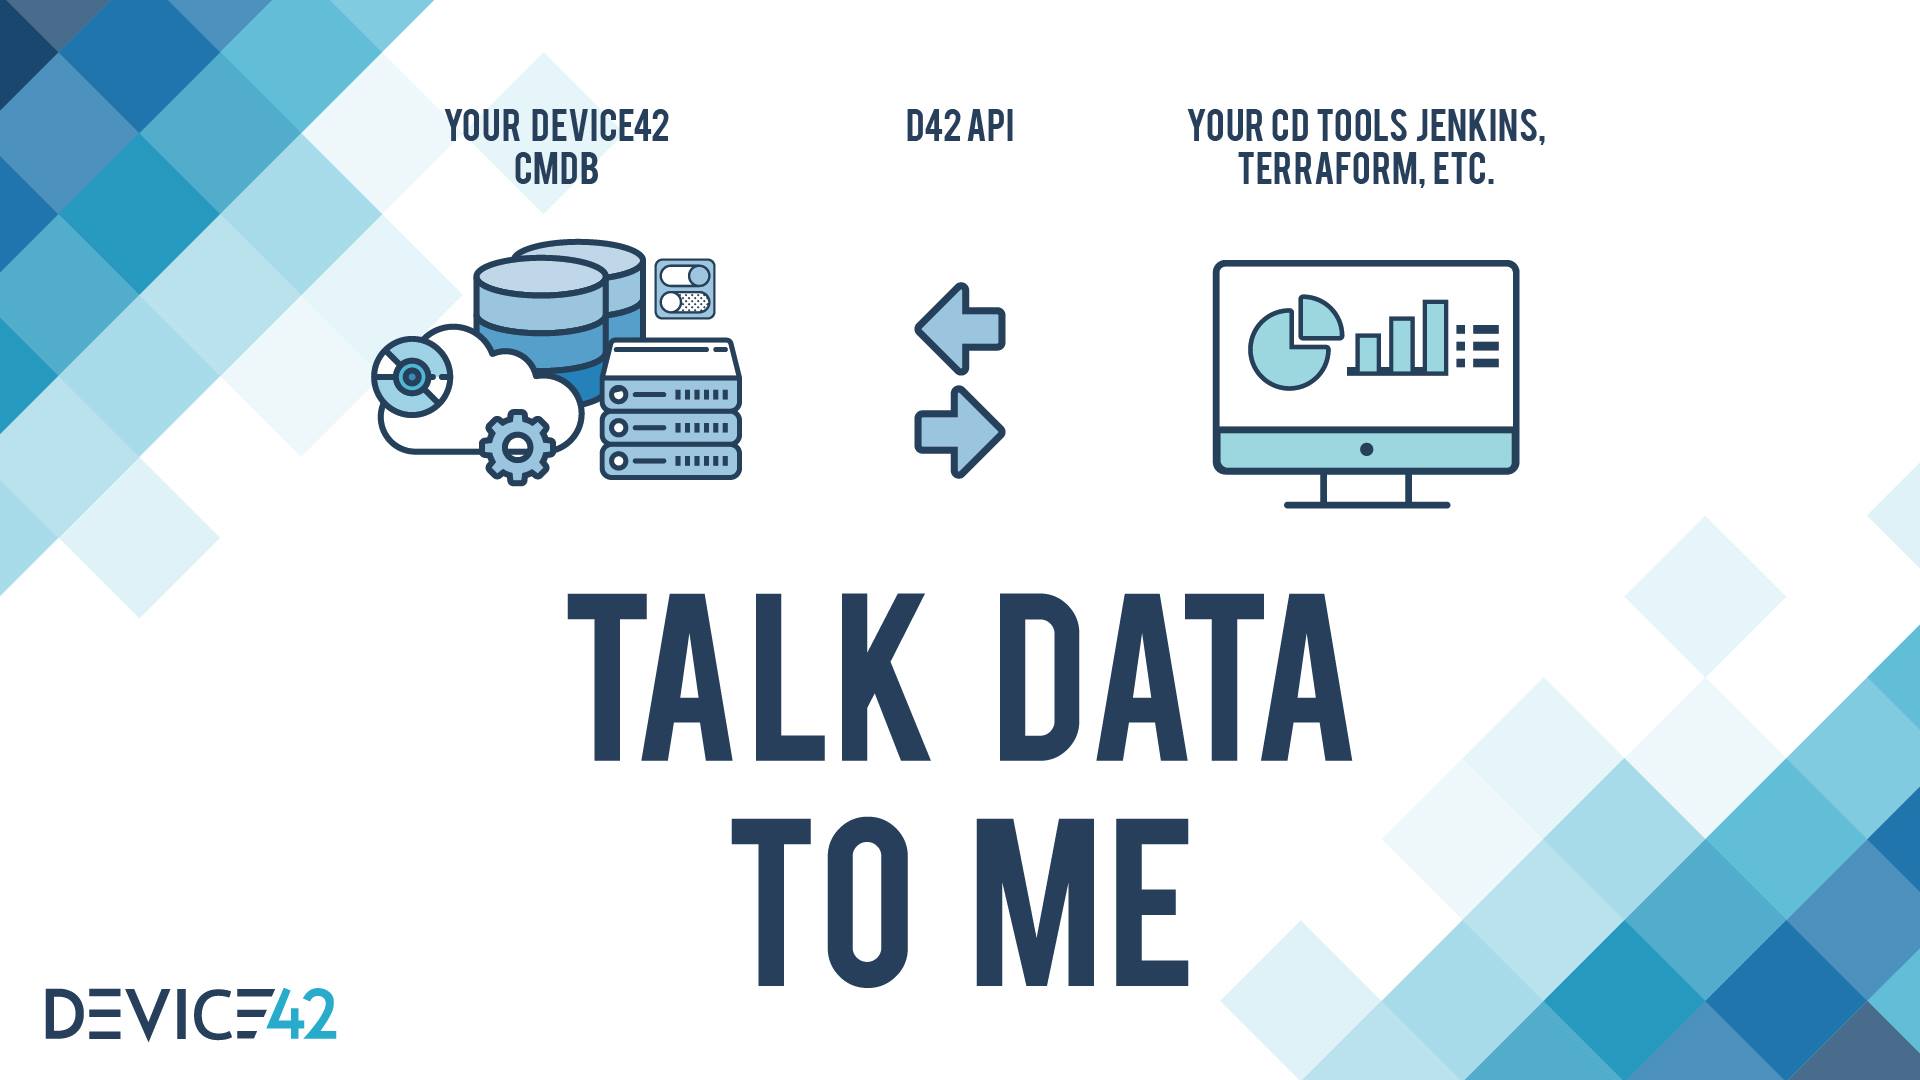 Device42 talk data to me